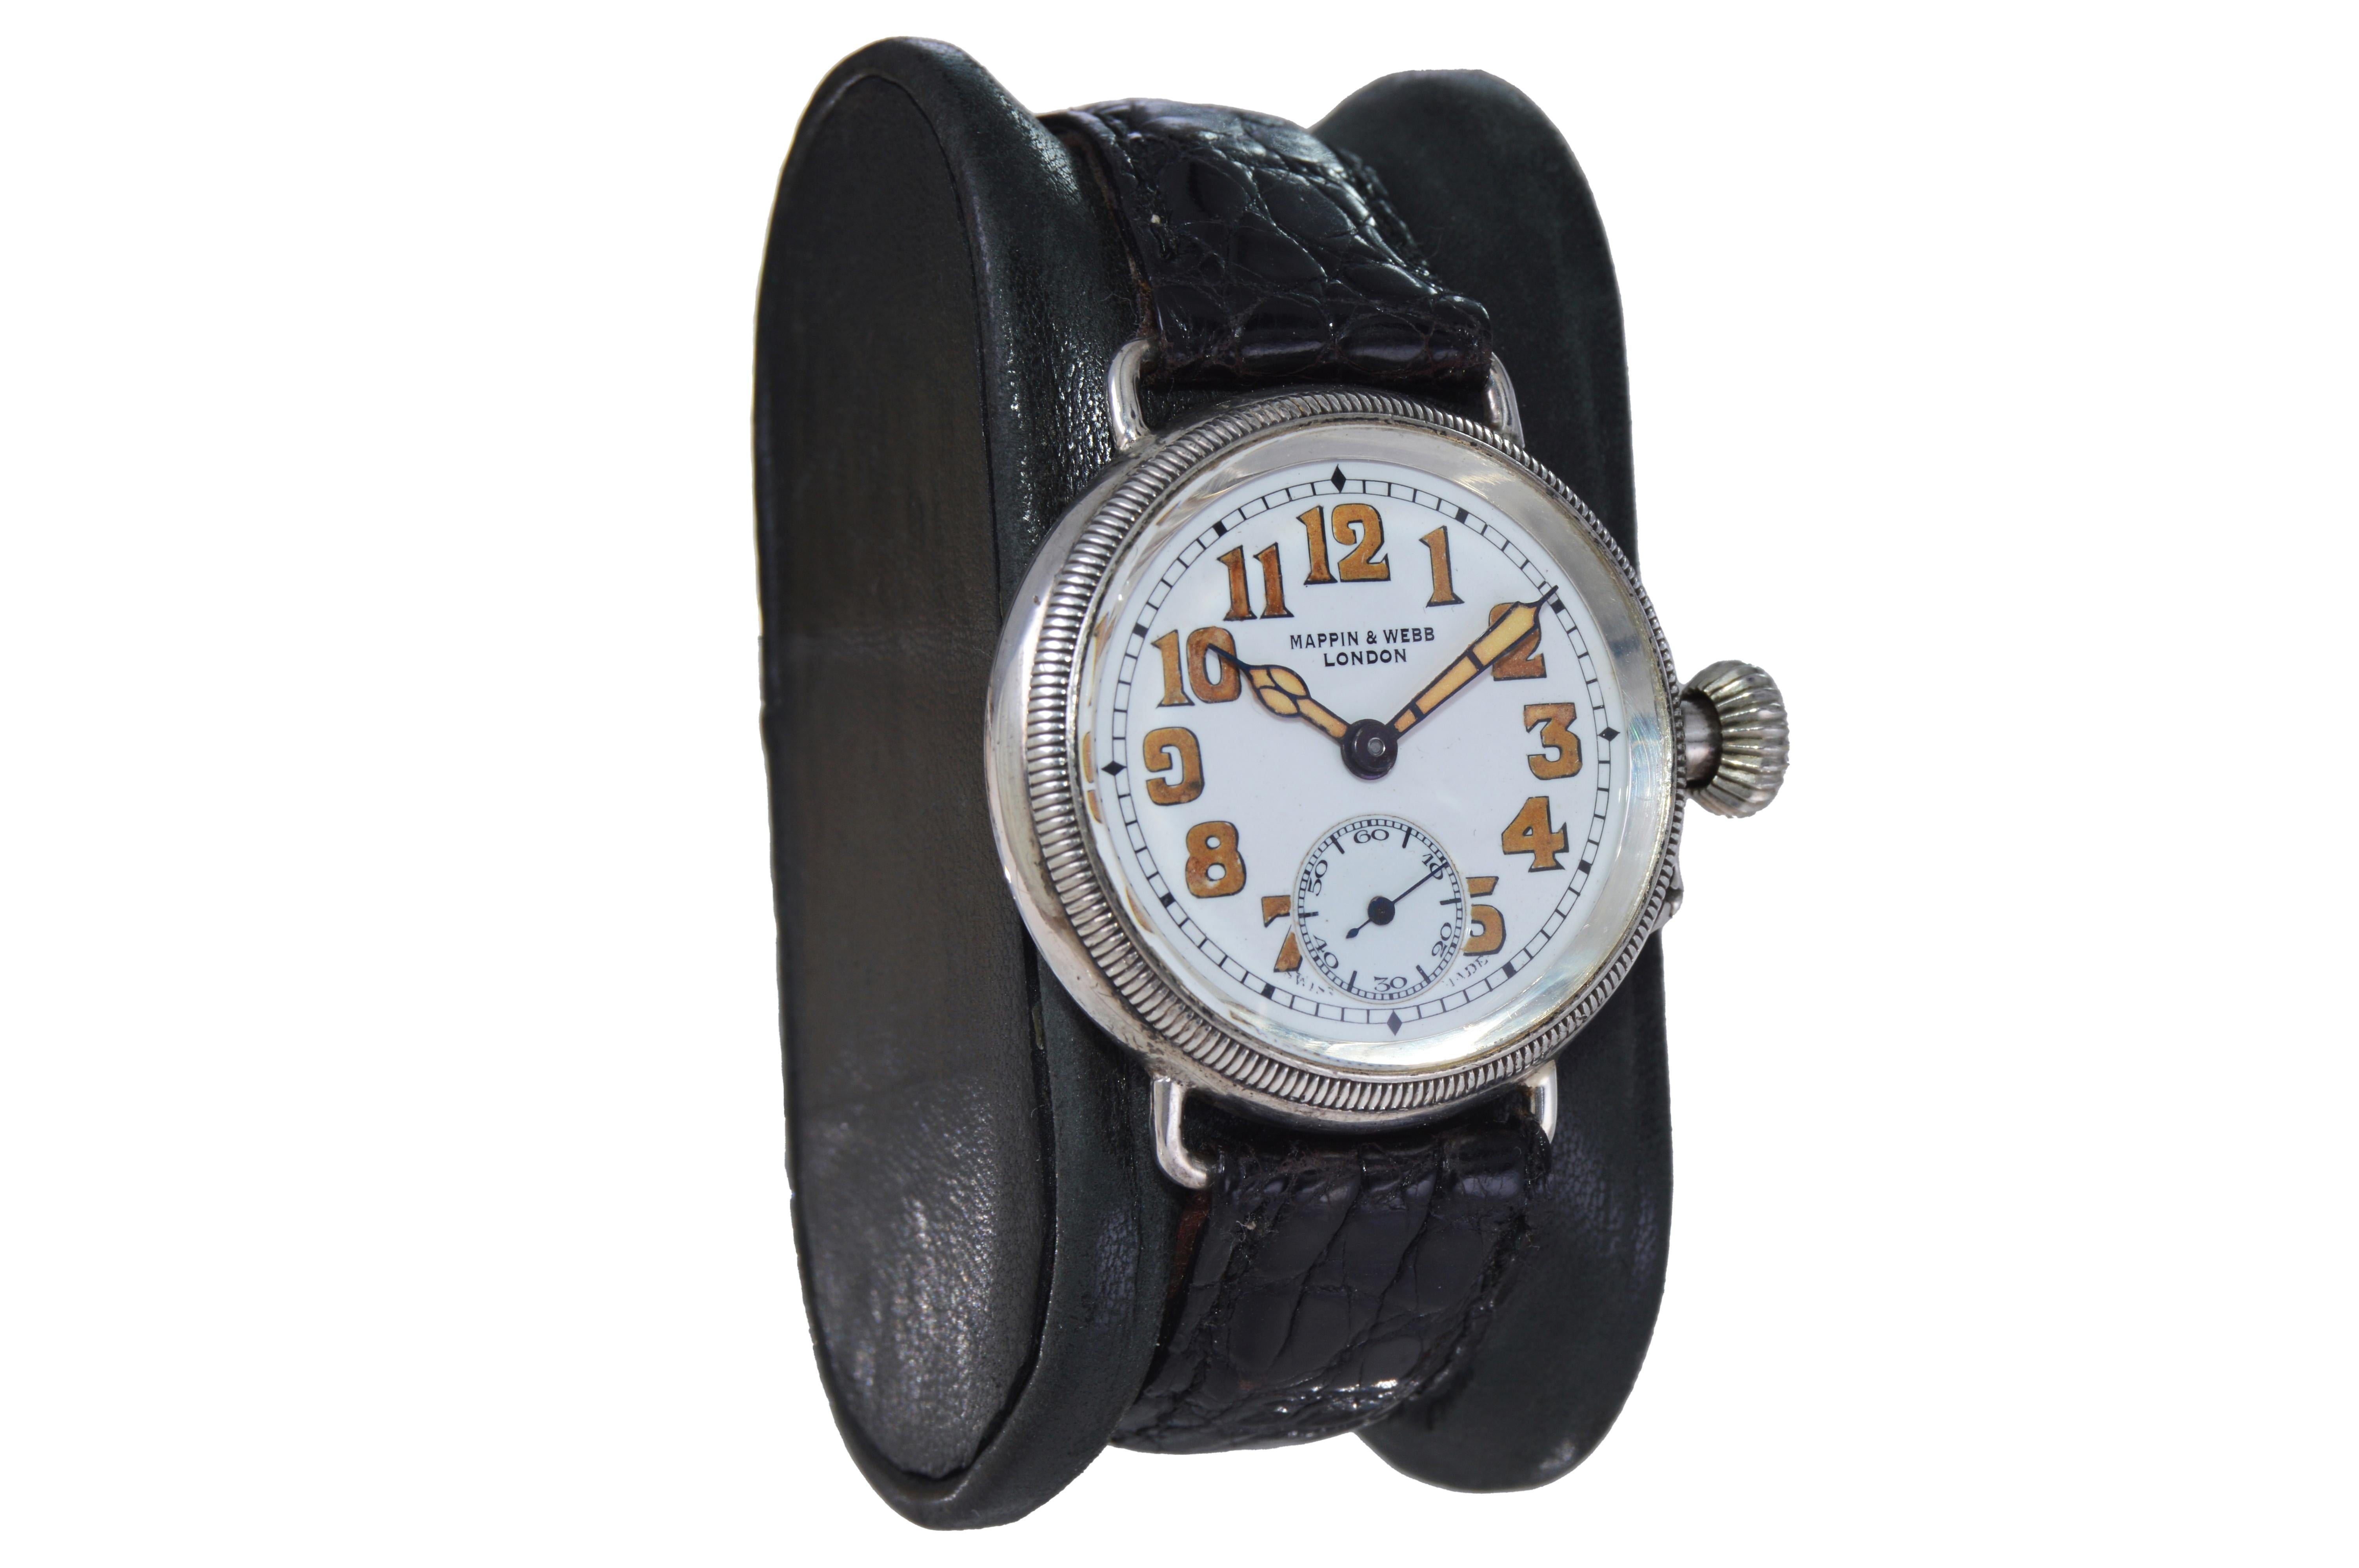 FACTORY / HOUSE: International Watch Company, for Mappin and Webb, London
STYLE / REFERENCE: Military / Campaign Style
METAL / MATERIAL: Sterling Silver
DIMENSIONS: Length 38mm X Diameter 33mm
CIRCA: 1915 / 20's
MOVEMENT / CALIBER: Manual Winding /